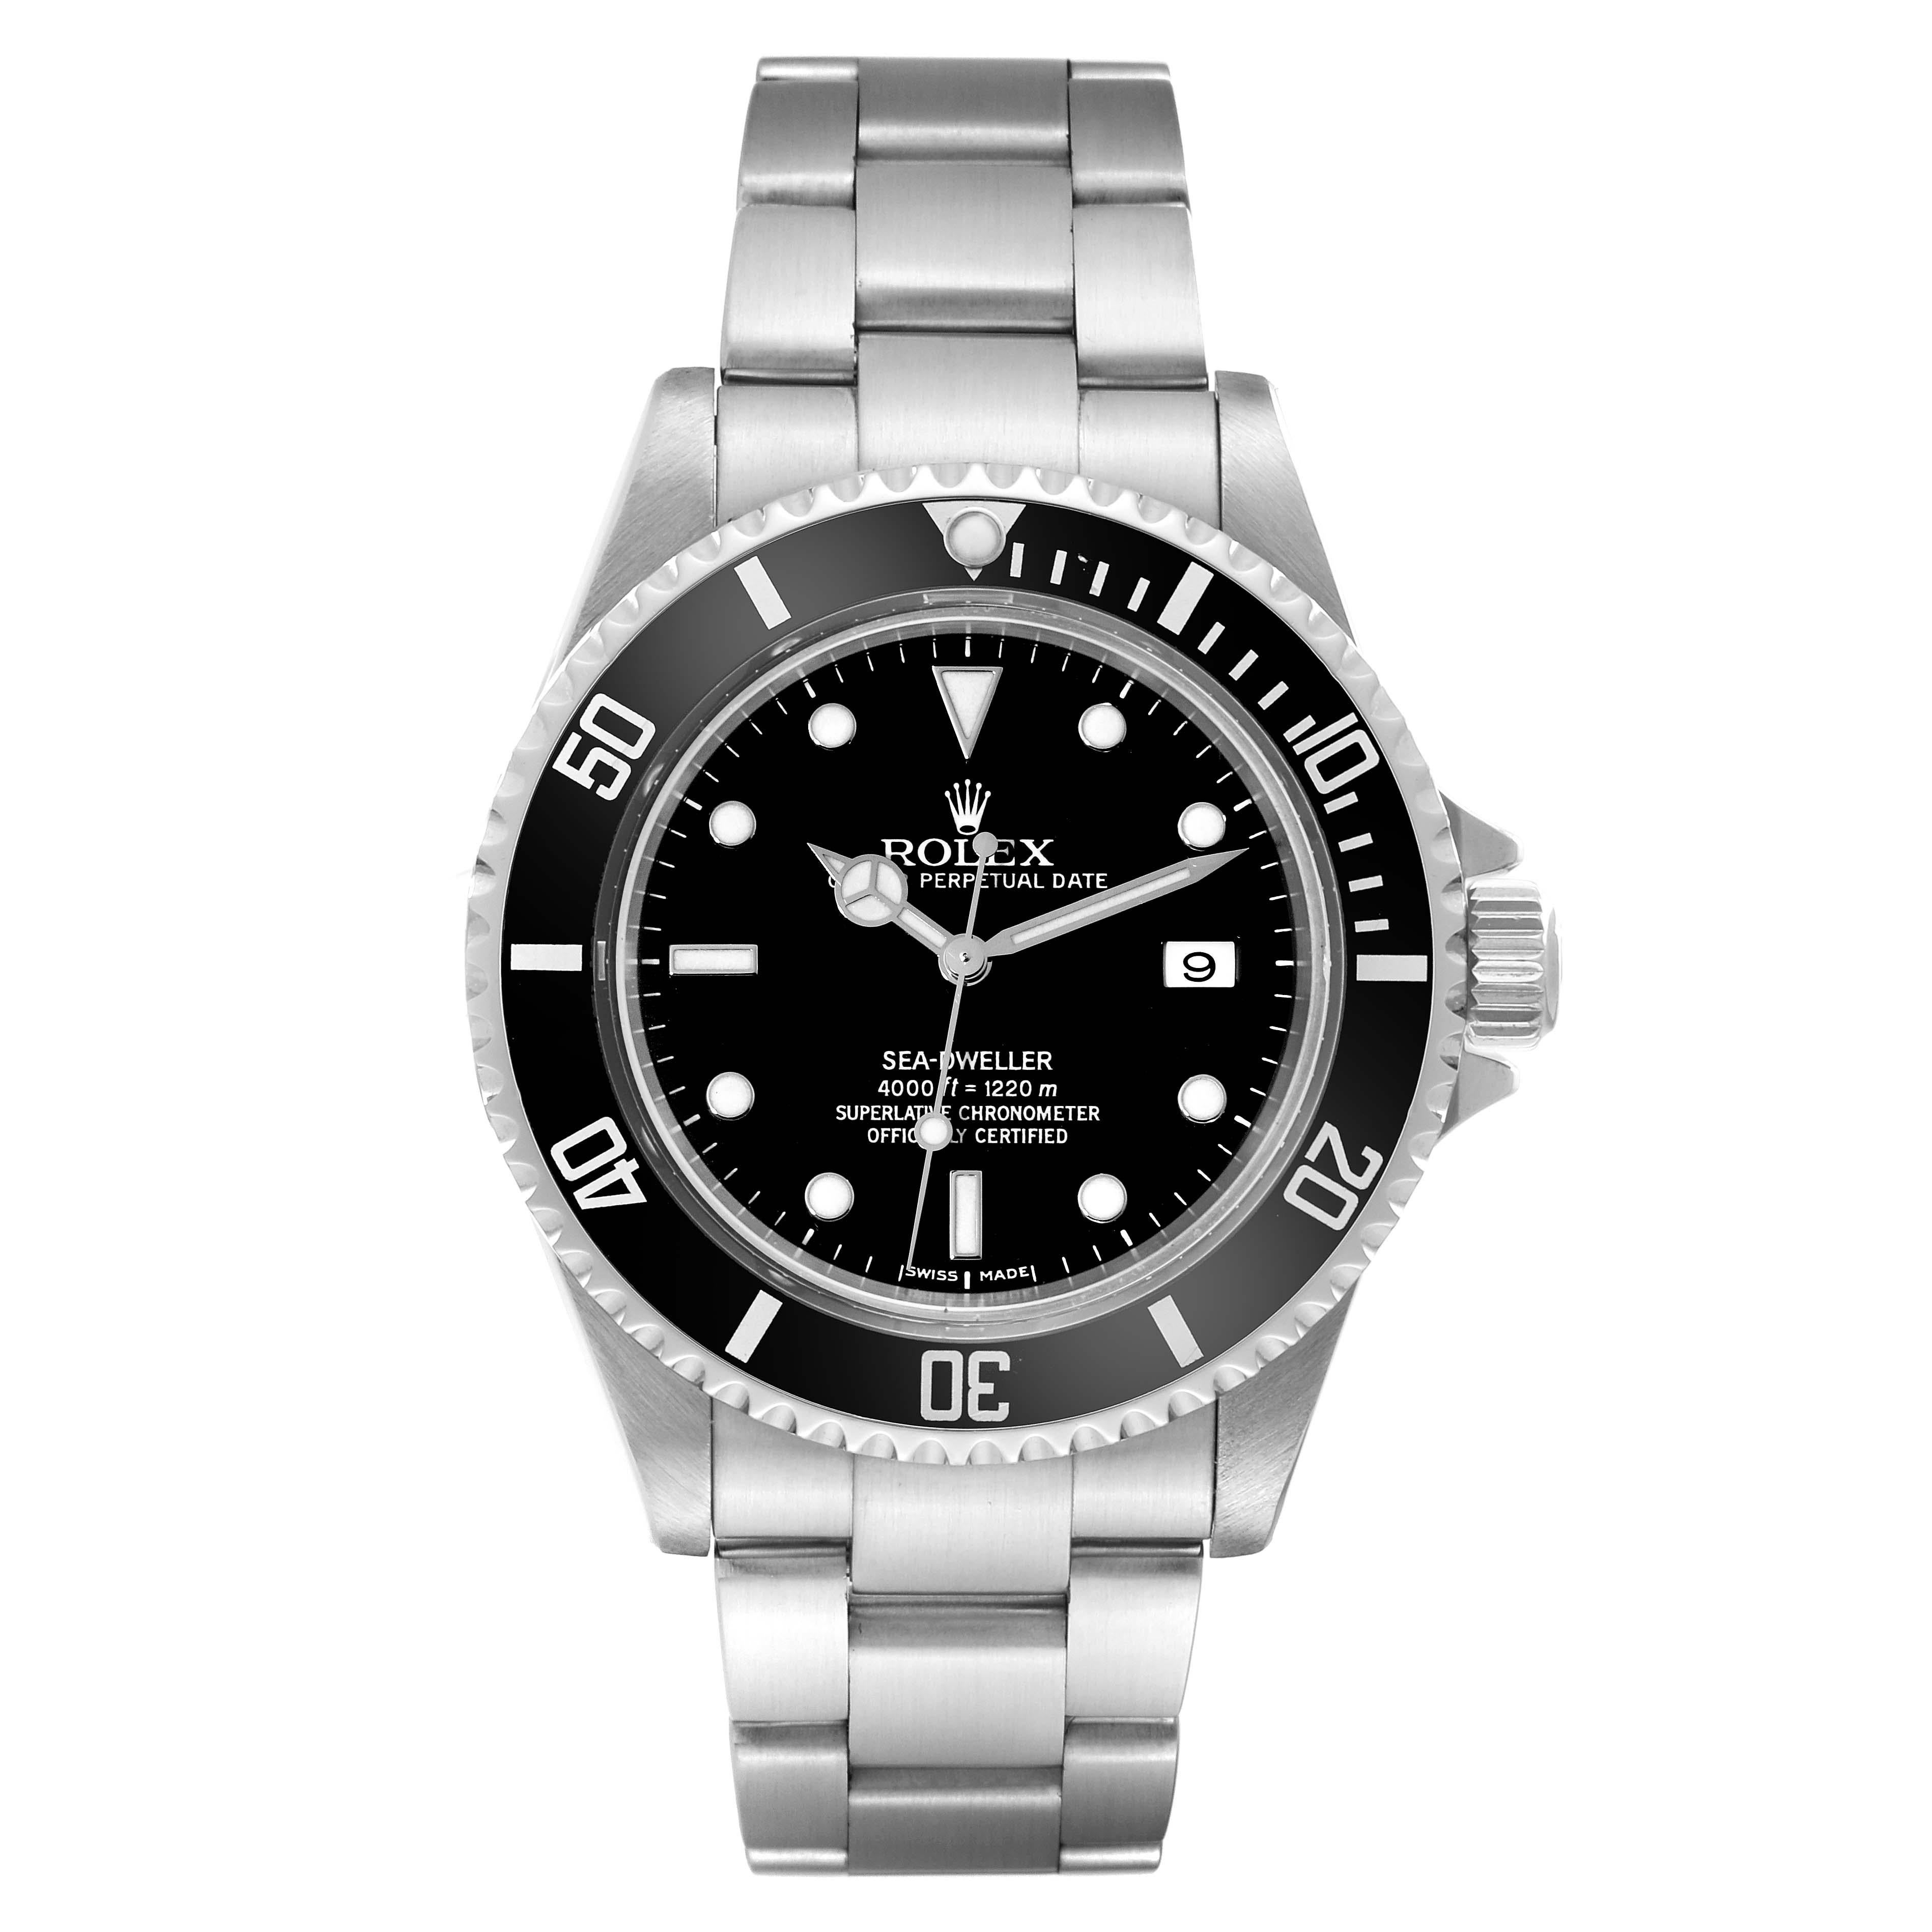 Rolex Seadweller 4000 Black Dial Steel Mens Watch 16600. Officially certified chronometer automatic self-winding movement. Stainless steel case 40 mm in diameter. Rolex logo on the crown. Special time-lapse unidirectional rotating bezel. Scratch